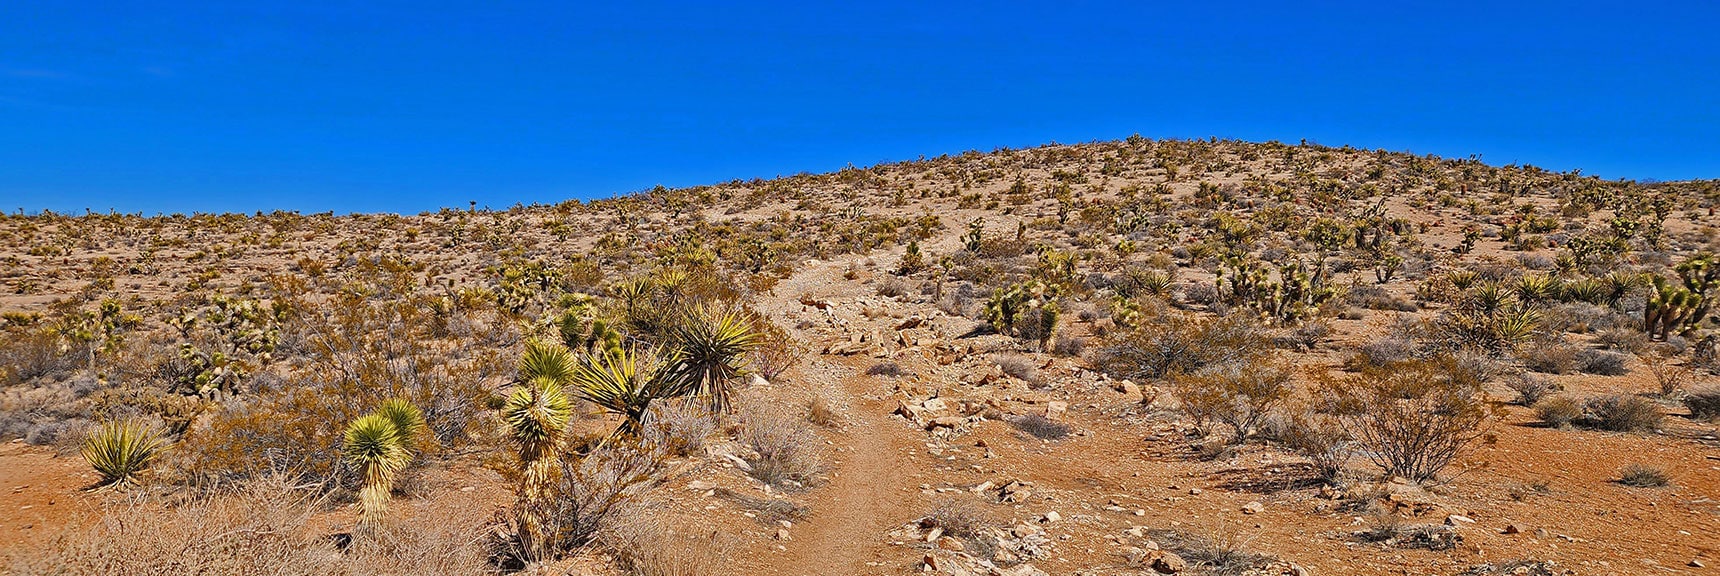 Now on First Finger Trail Looking Up That Ridge | Western Trails and Ridges | Blue Diamond Hill | Red Rock Canyon, Nevada